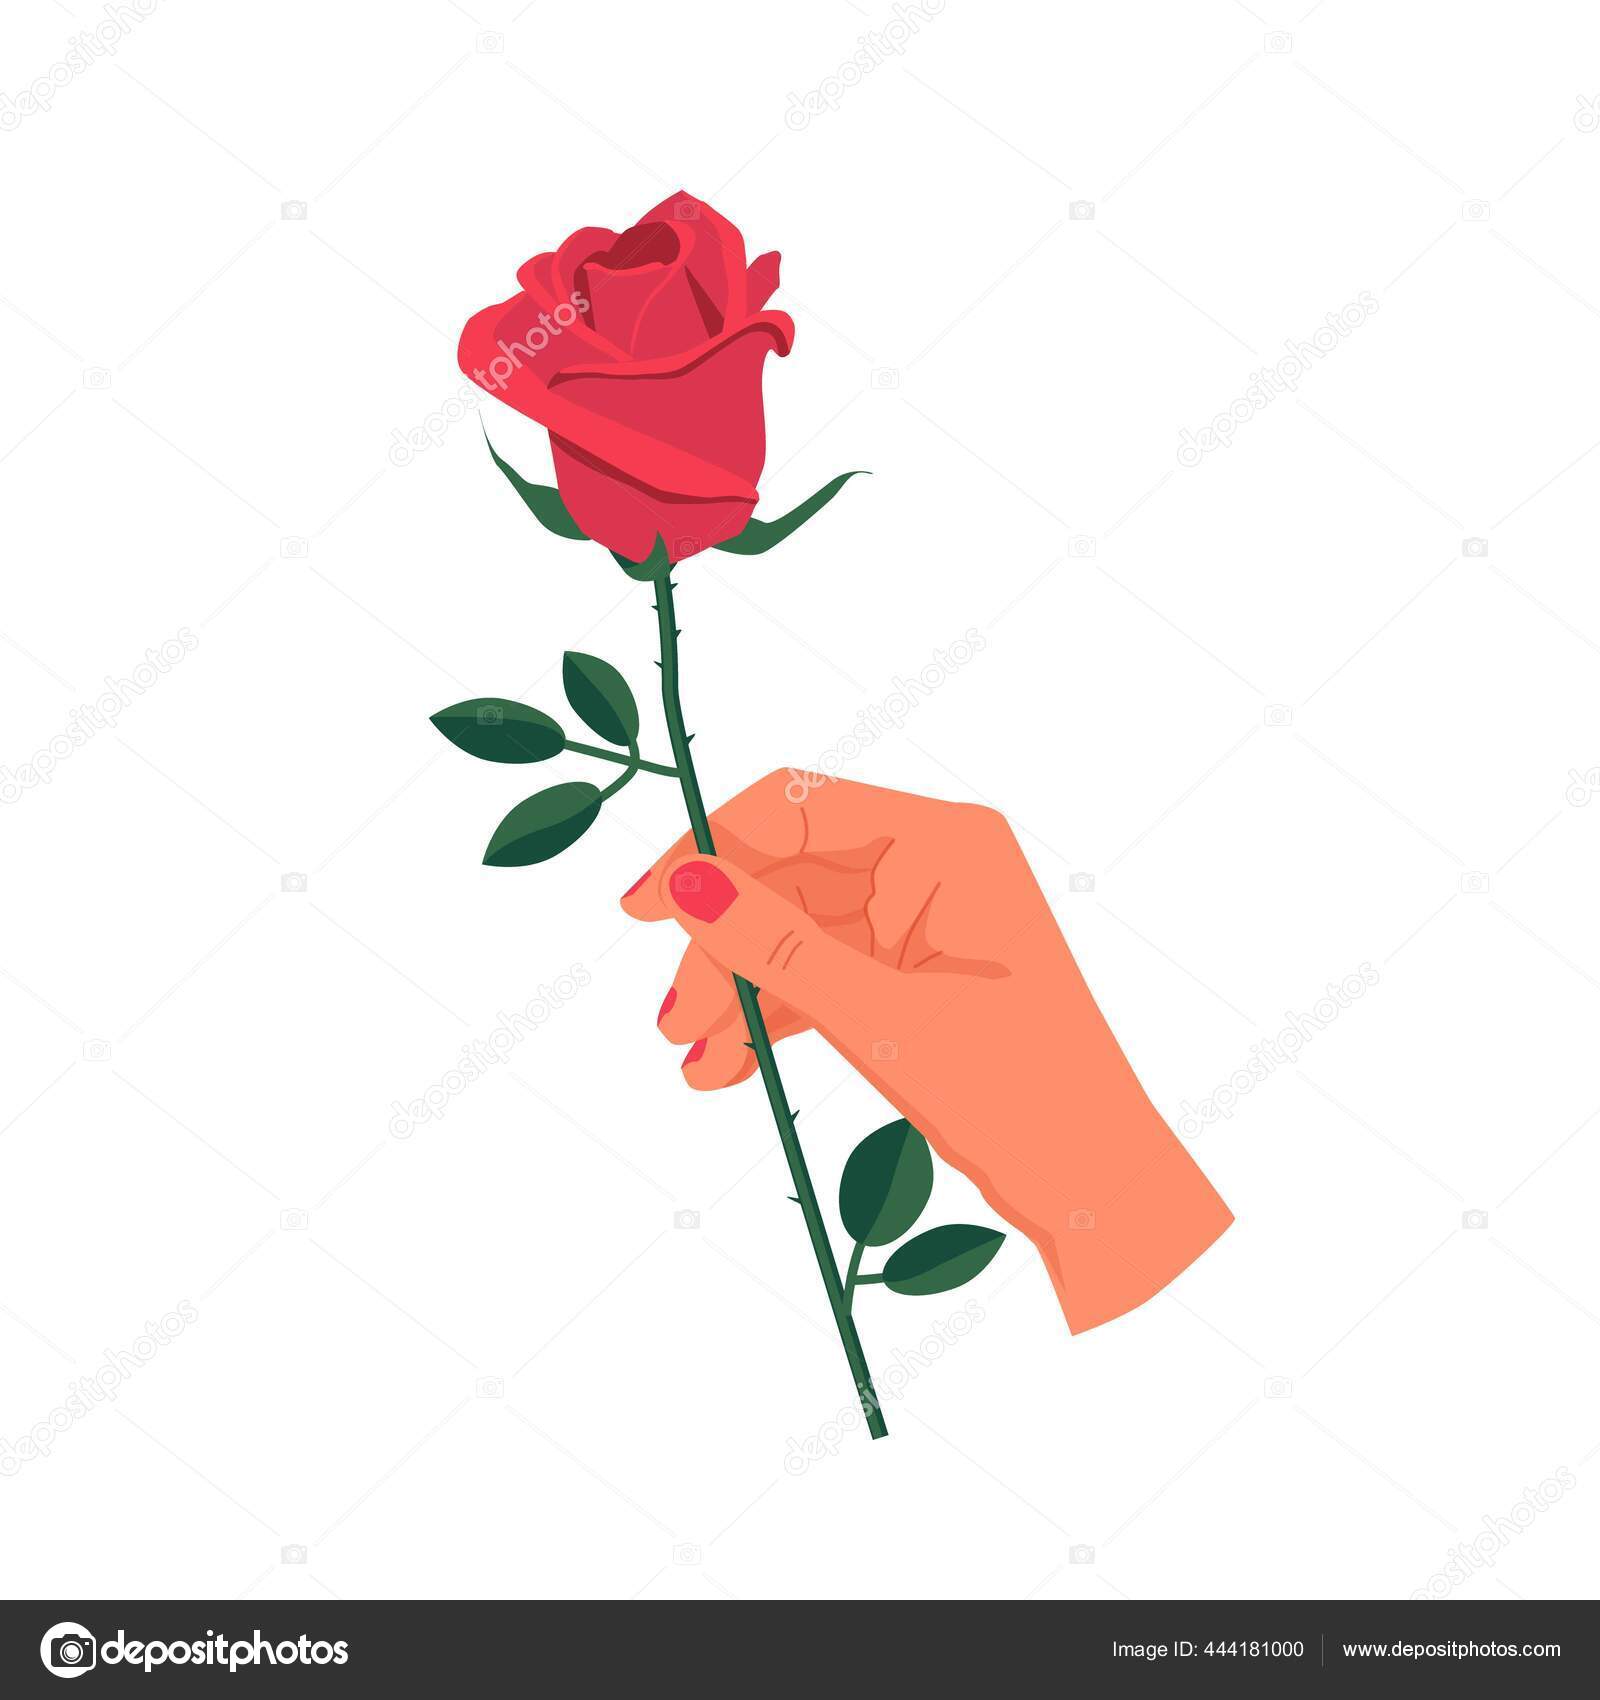 Blooming Red Rose Vector Flat Isolated Illustration Stock